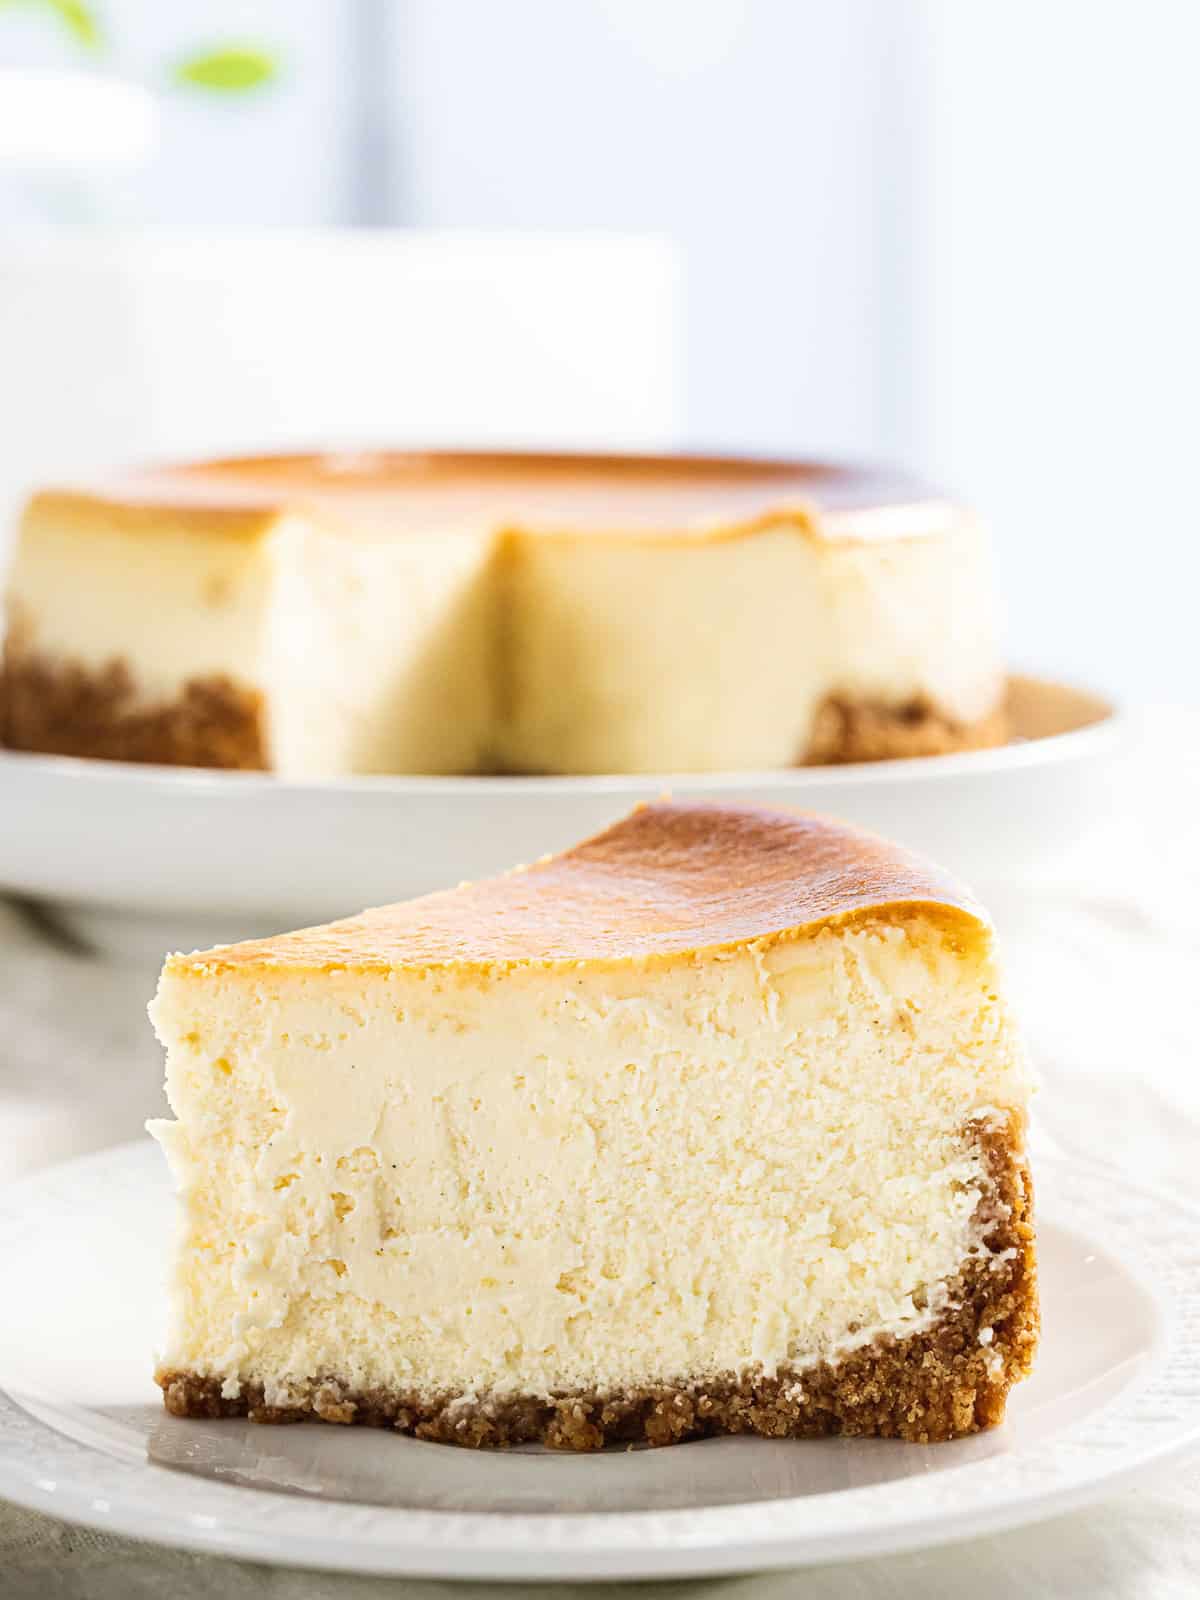 A slice of classic New York-style cheesecake on a plate.